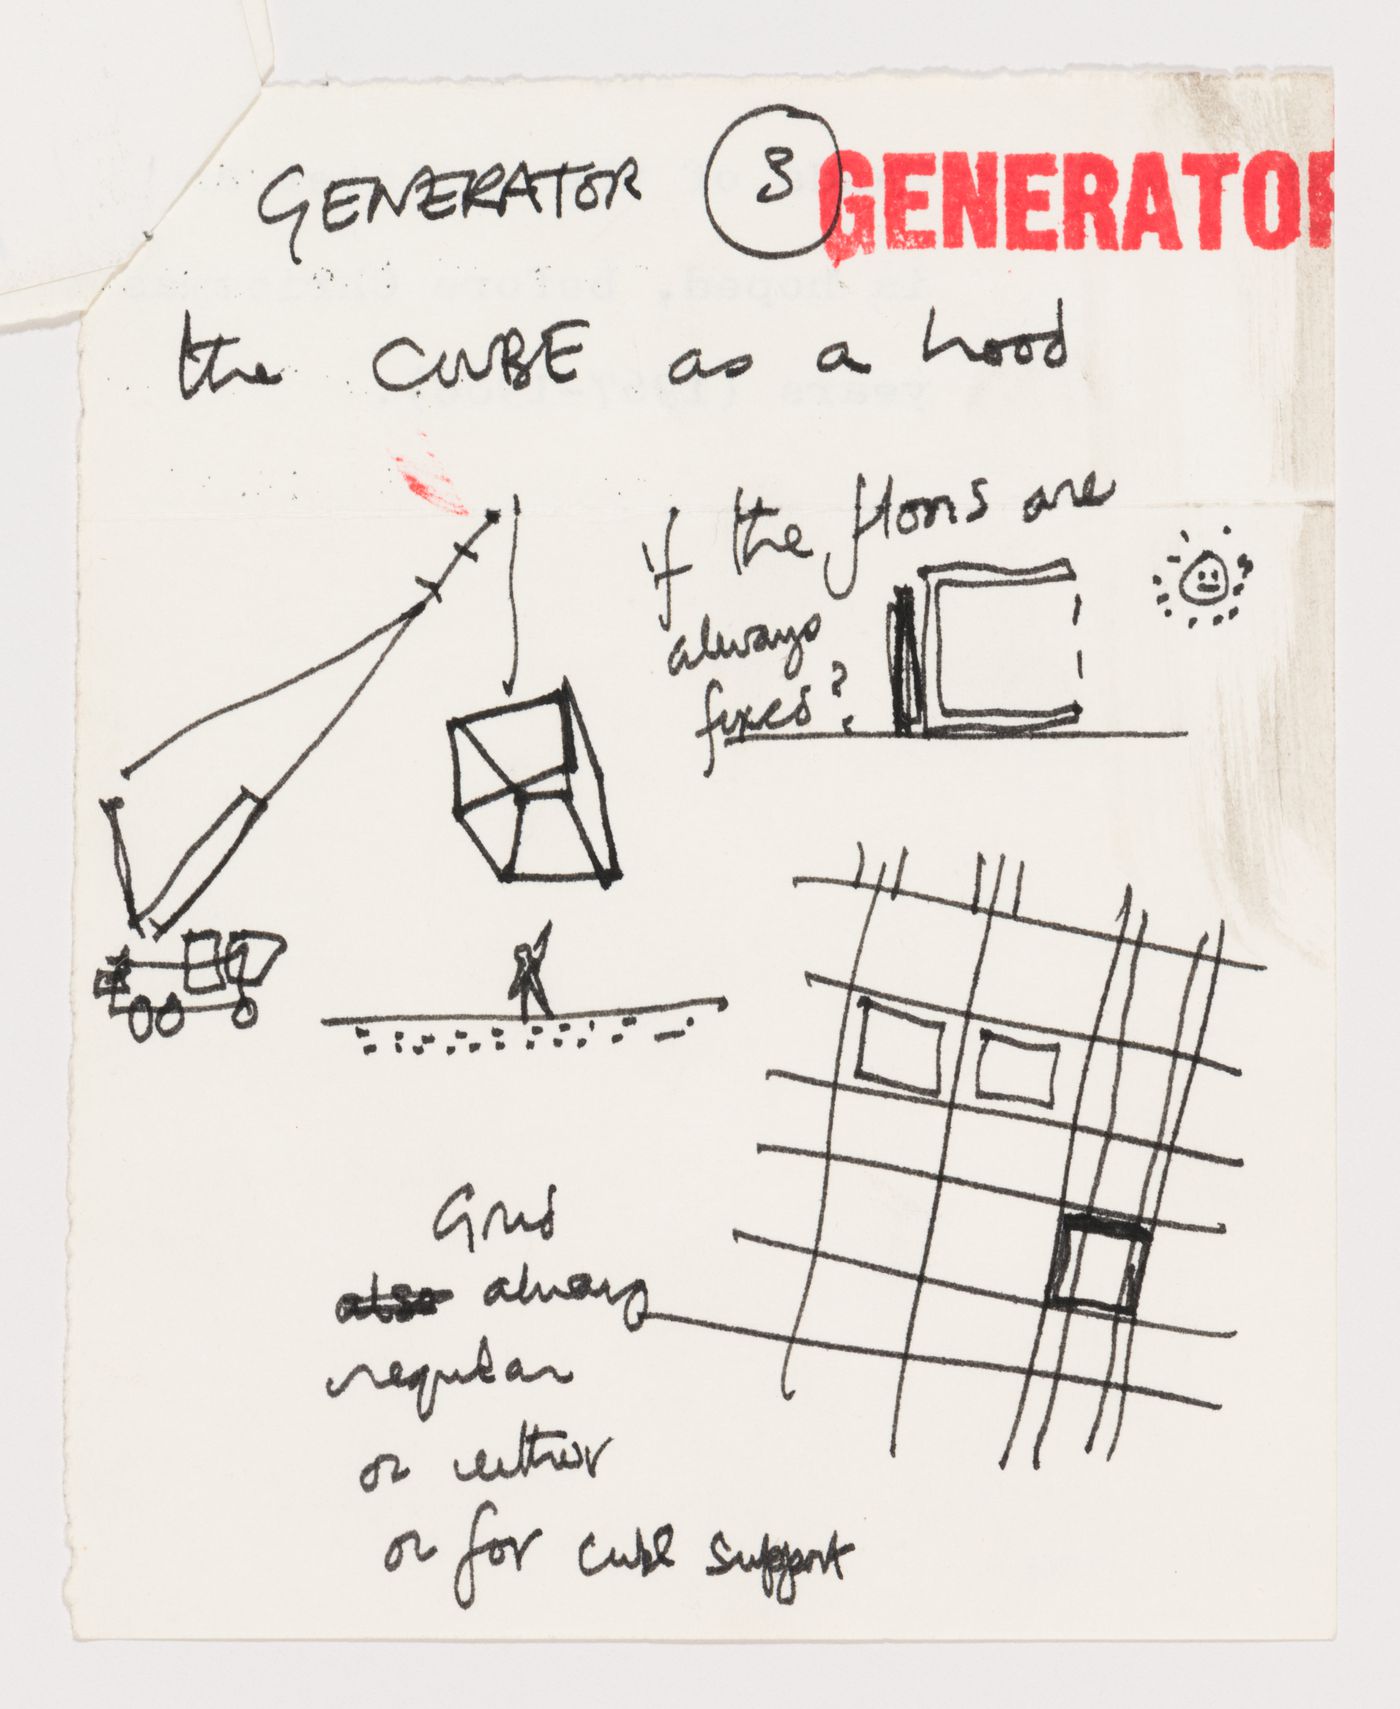 Generator project, White Oak Plantation, Yulee, Florida: notes and sketches